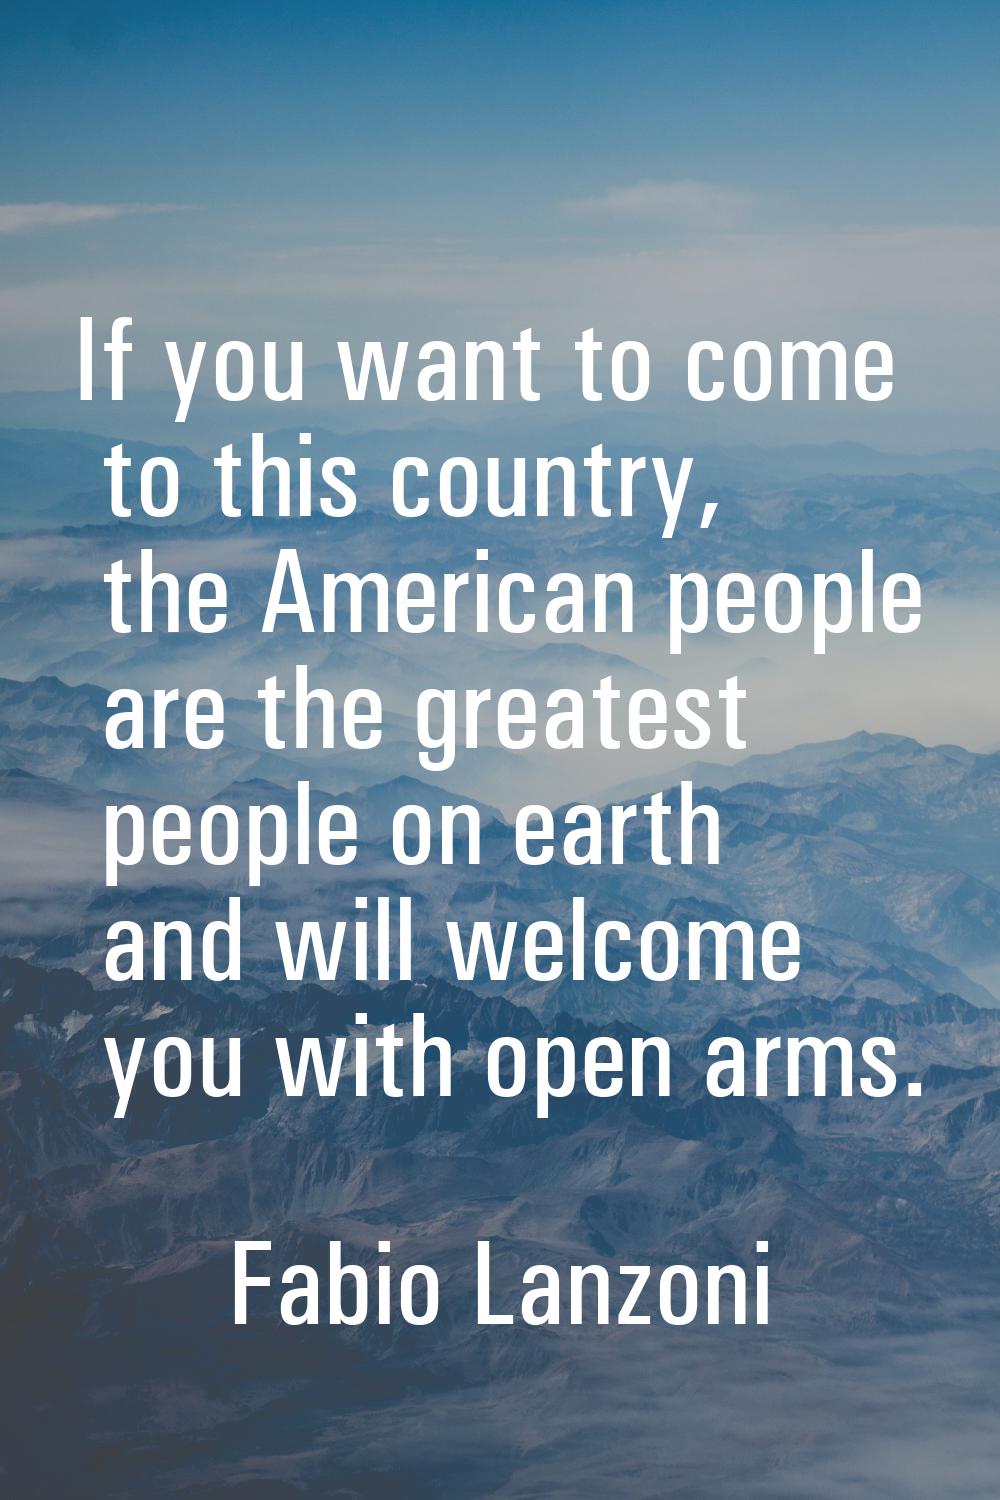 If you want to come to this country, the American people are the greatest people on earth and will 